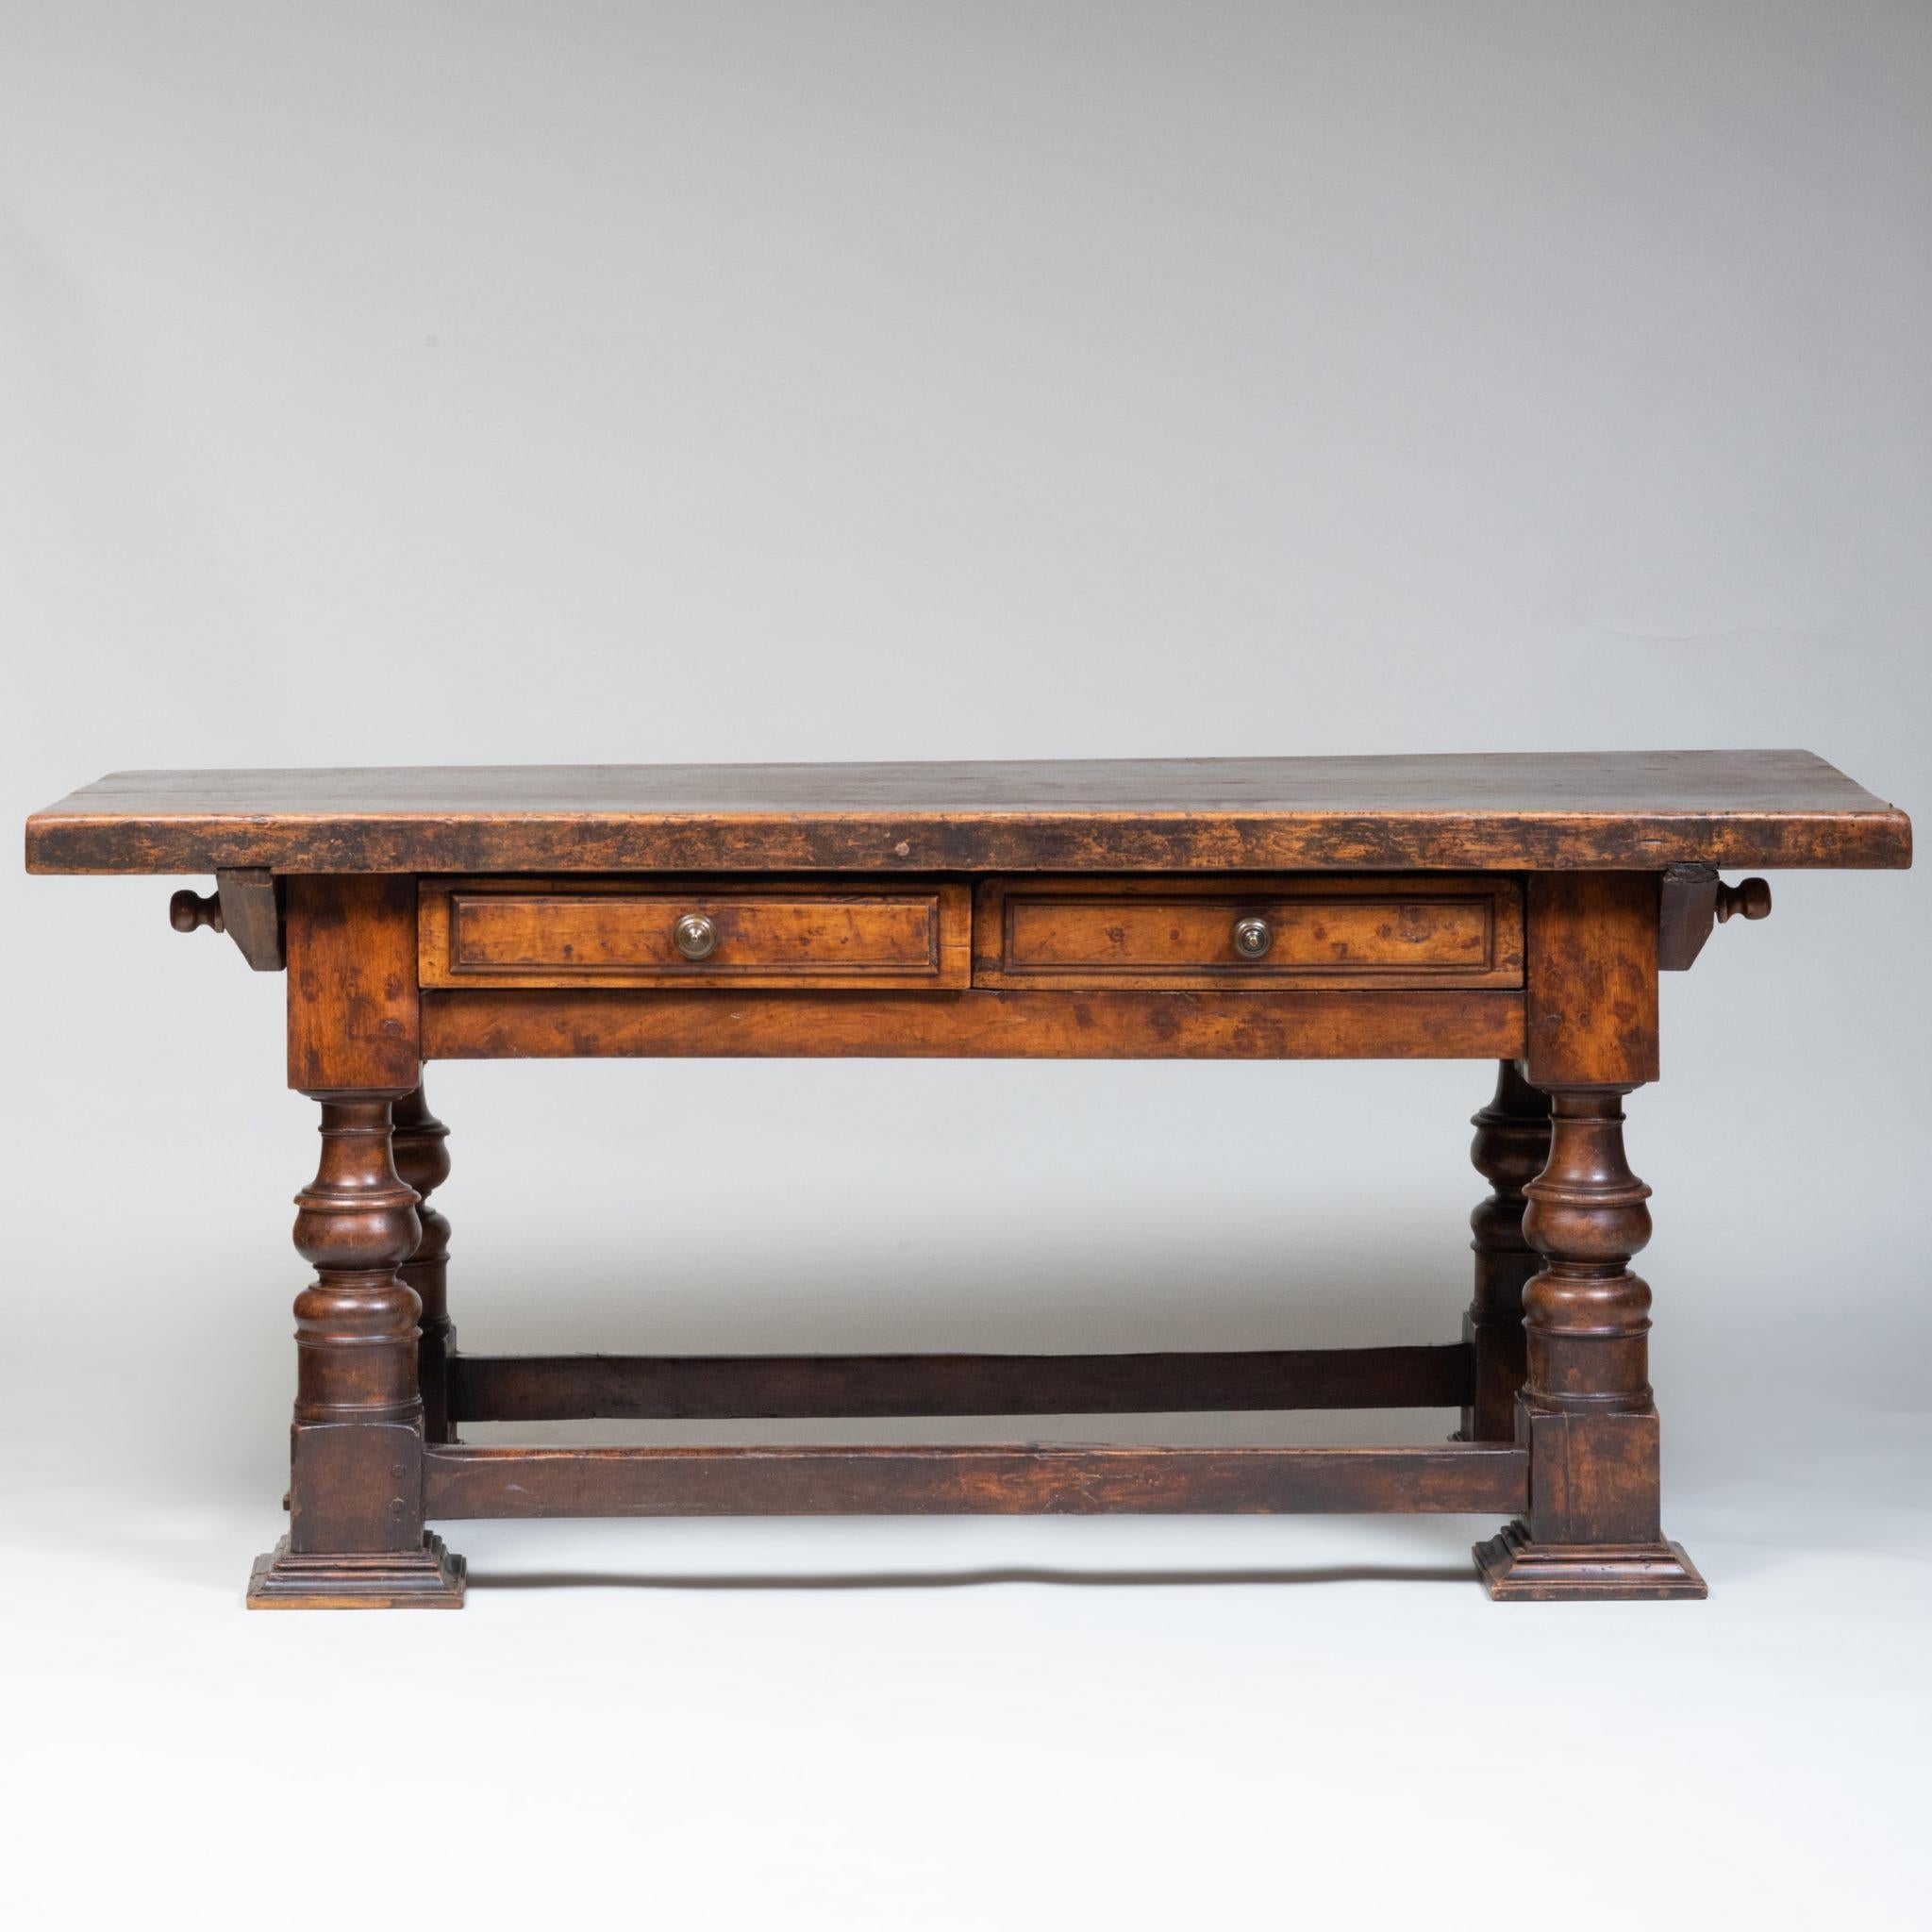 Fitted with two drawers, raised on turned legs, joinedby a stretcher on later molded flat feet.